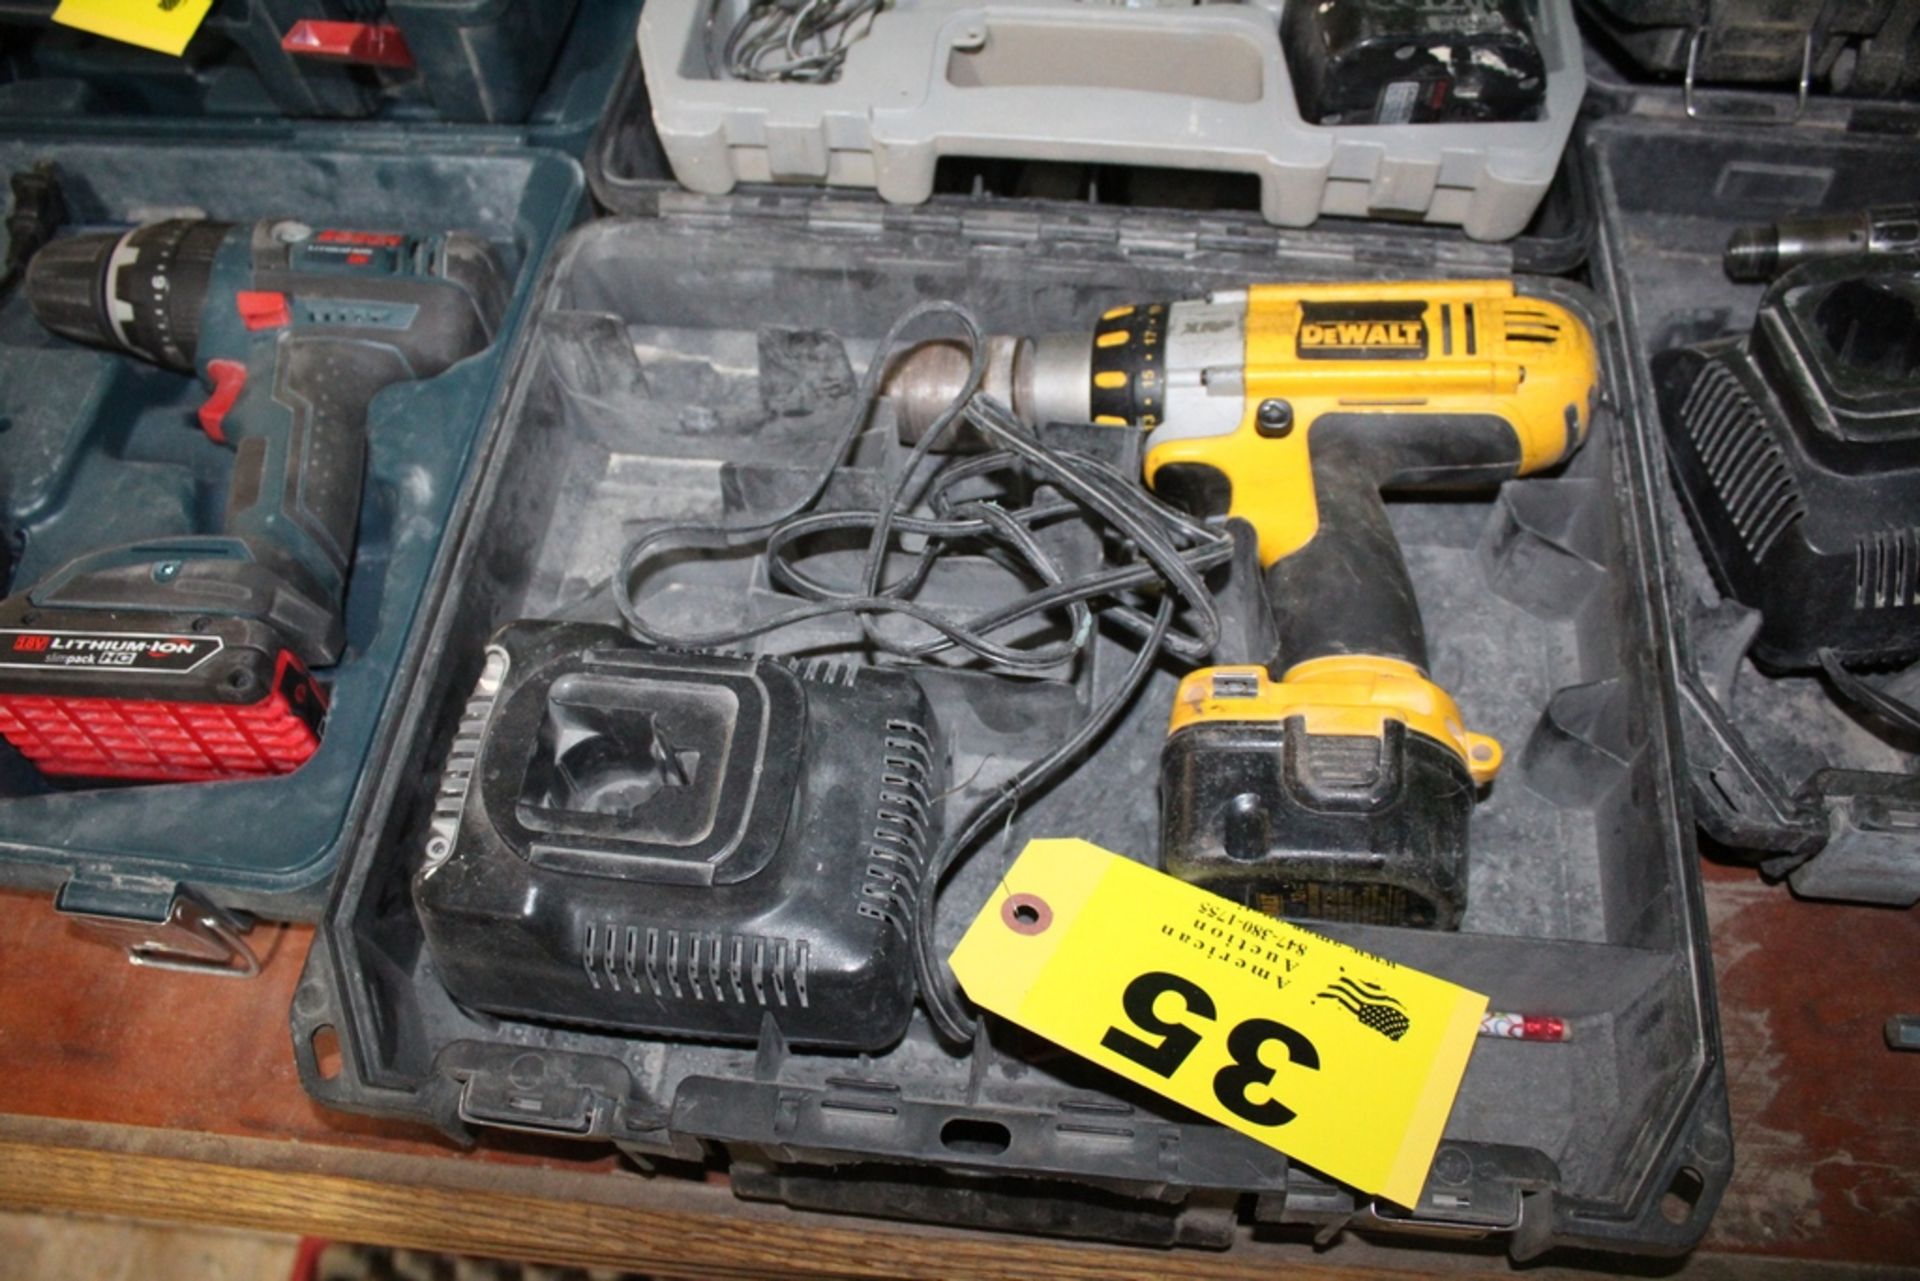 DEWALT MODEL DC940 1/2" CORDLESS DRILL/DRIVER WITH BATTERY, CHARGER AND CASE